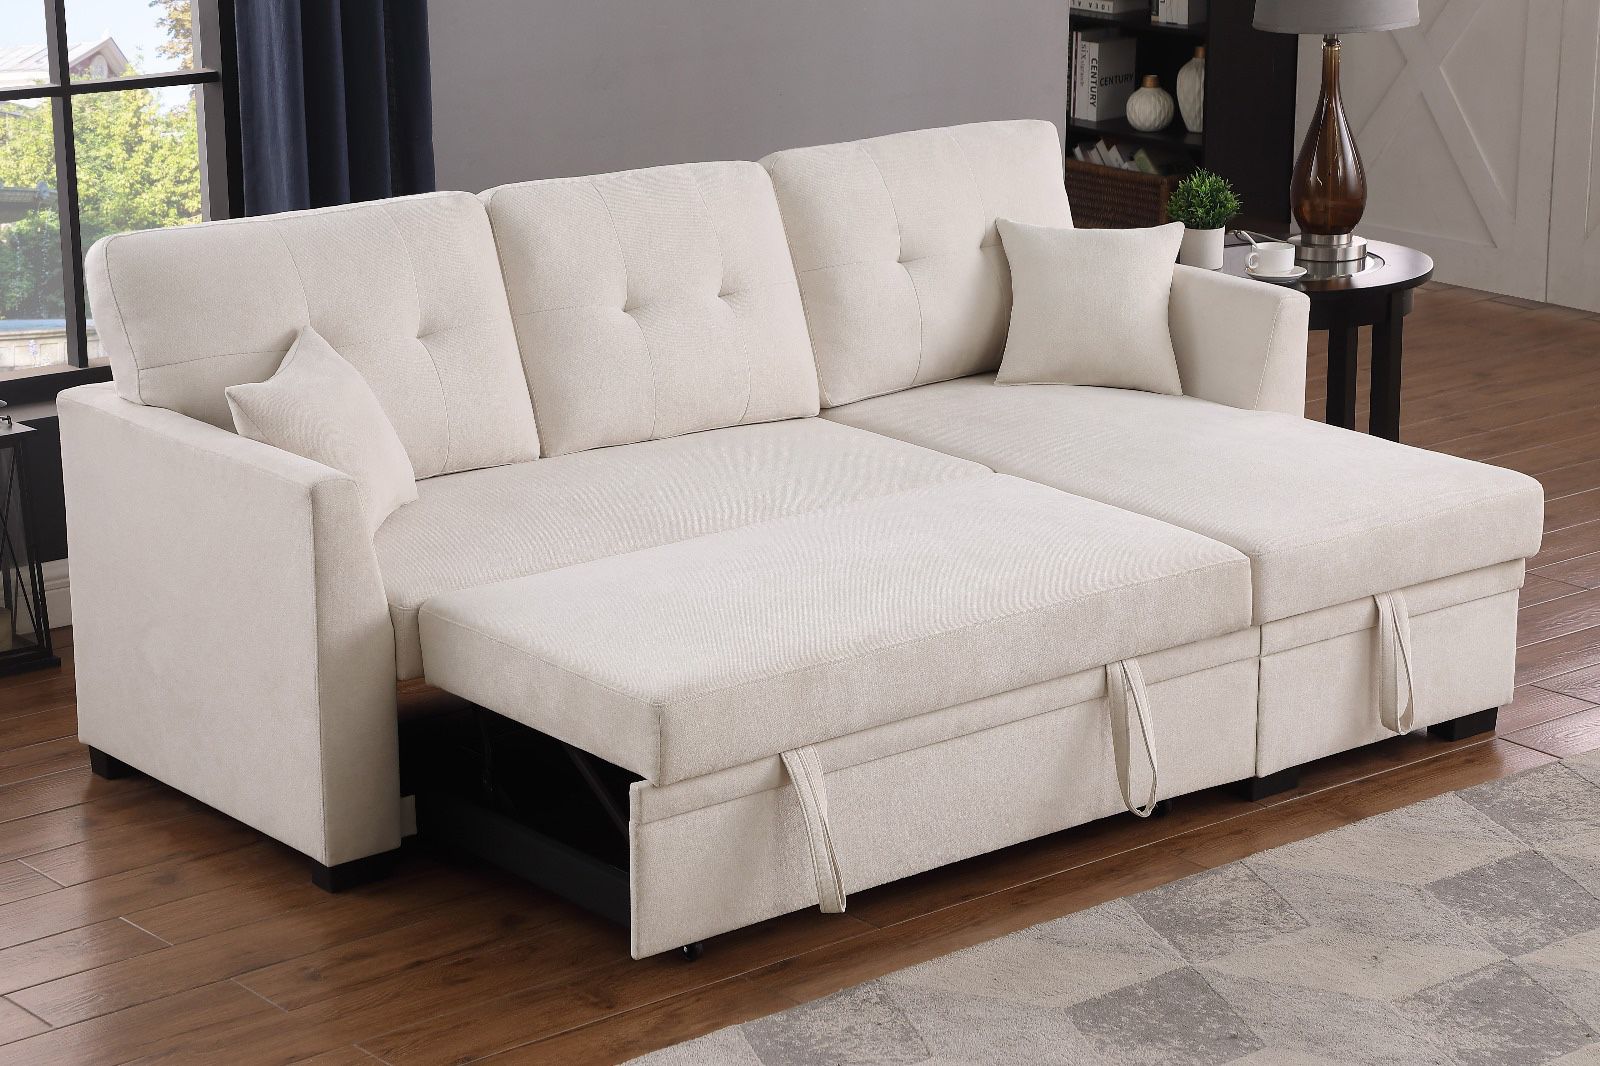 Hot Deals! Sectional , Sectionals, Sectional For Small Living Room, Apartment Sectional Sofa, Sofabed, Sofa Bed, Sofa Bed Couch, Sleeper Sofa